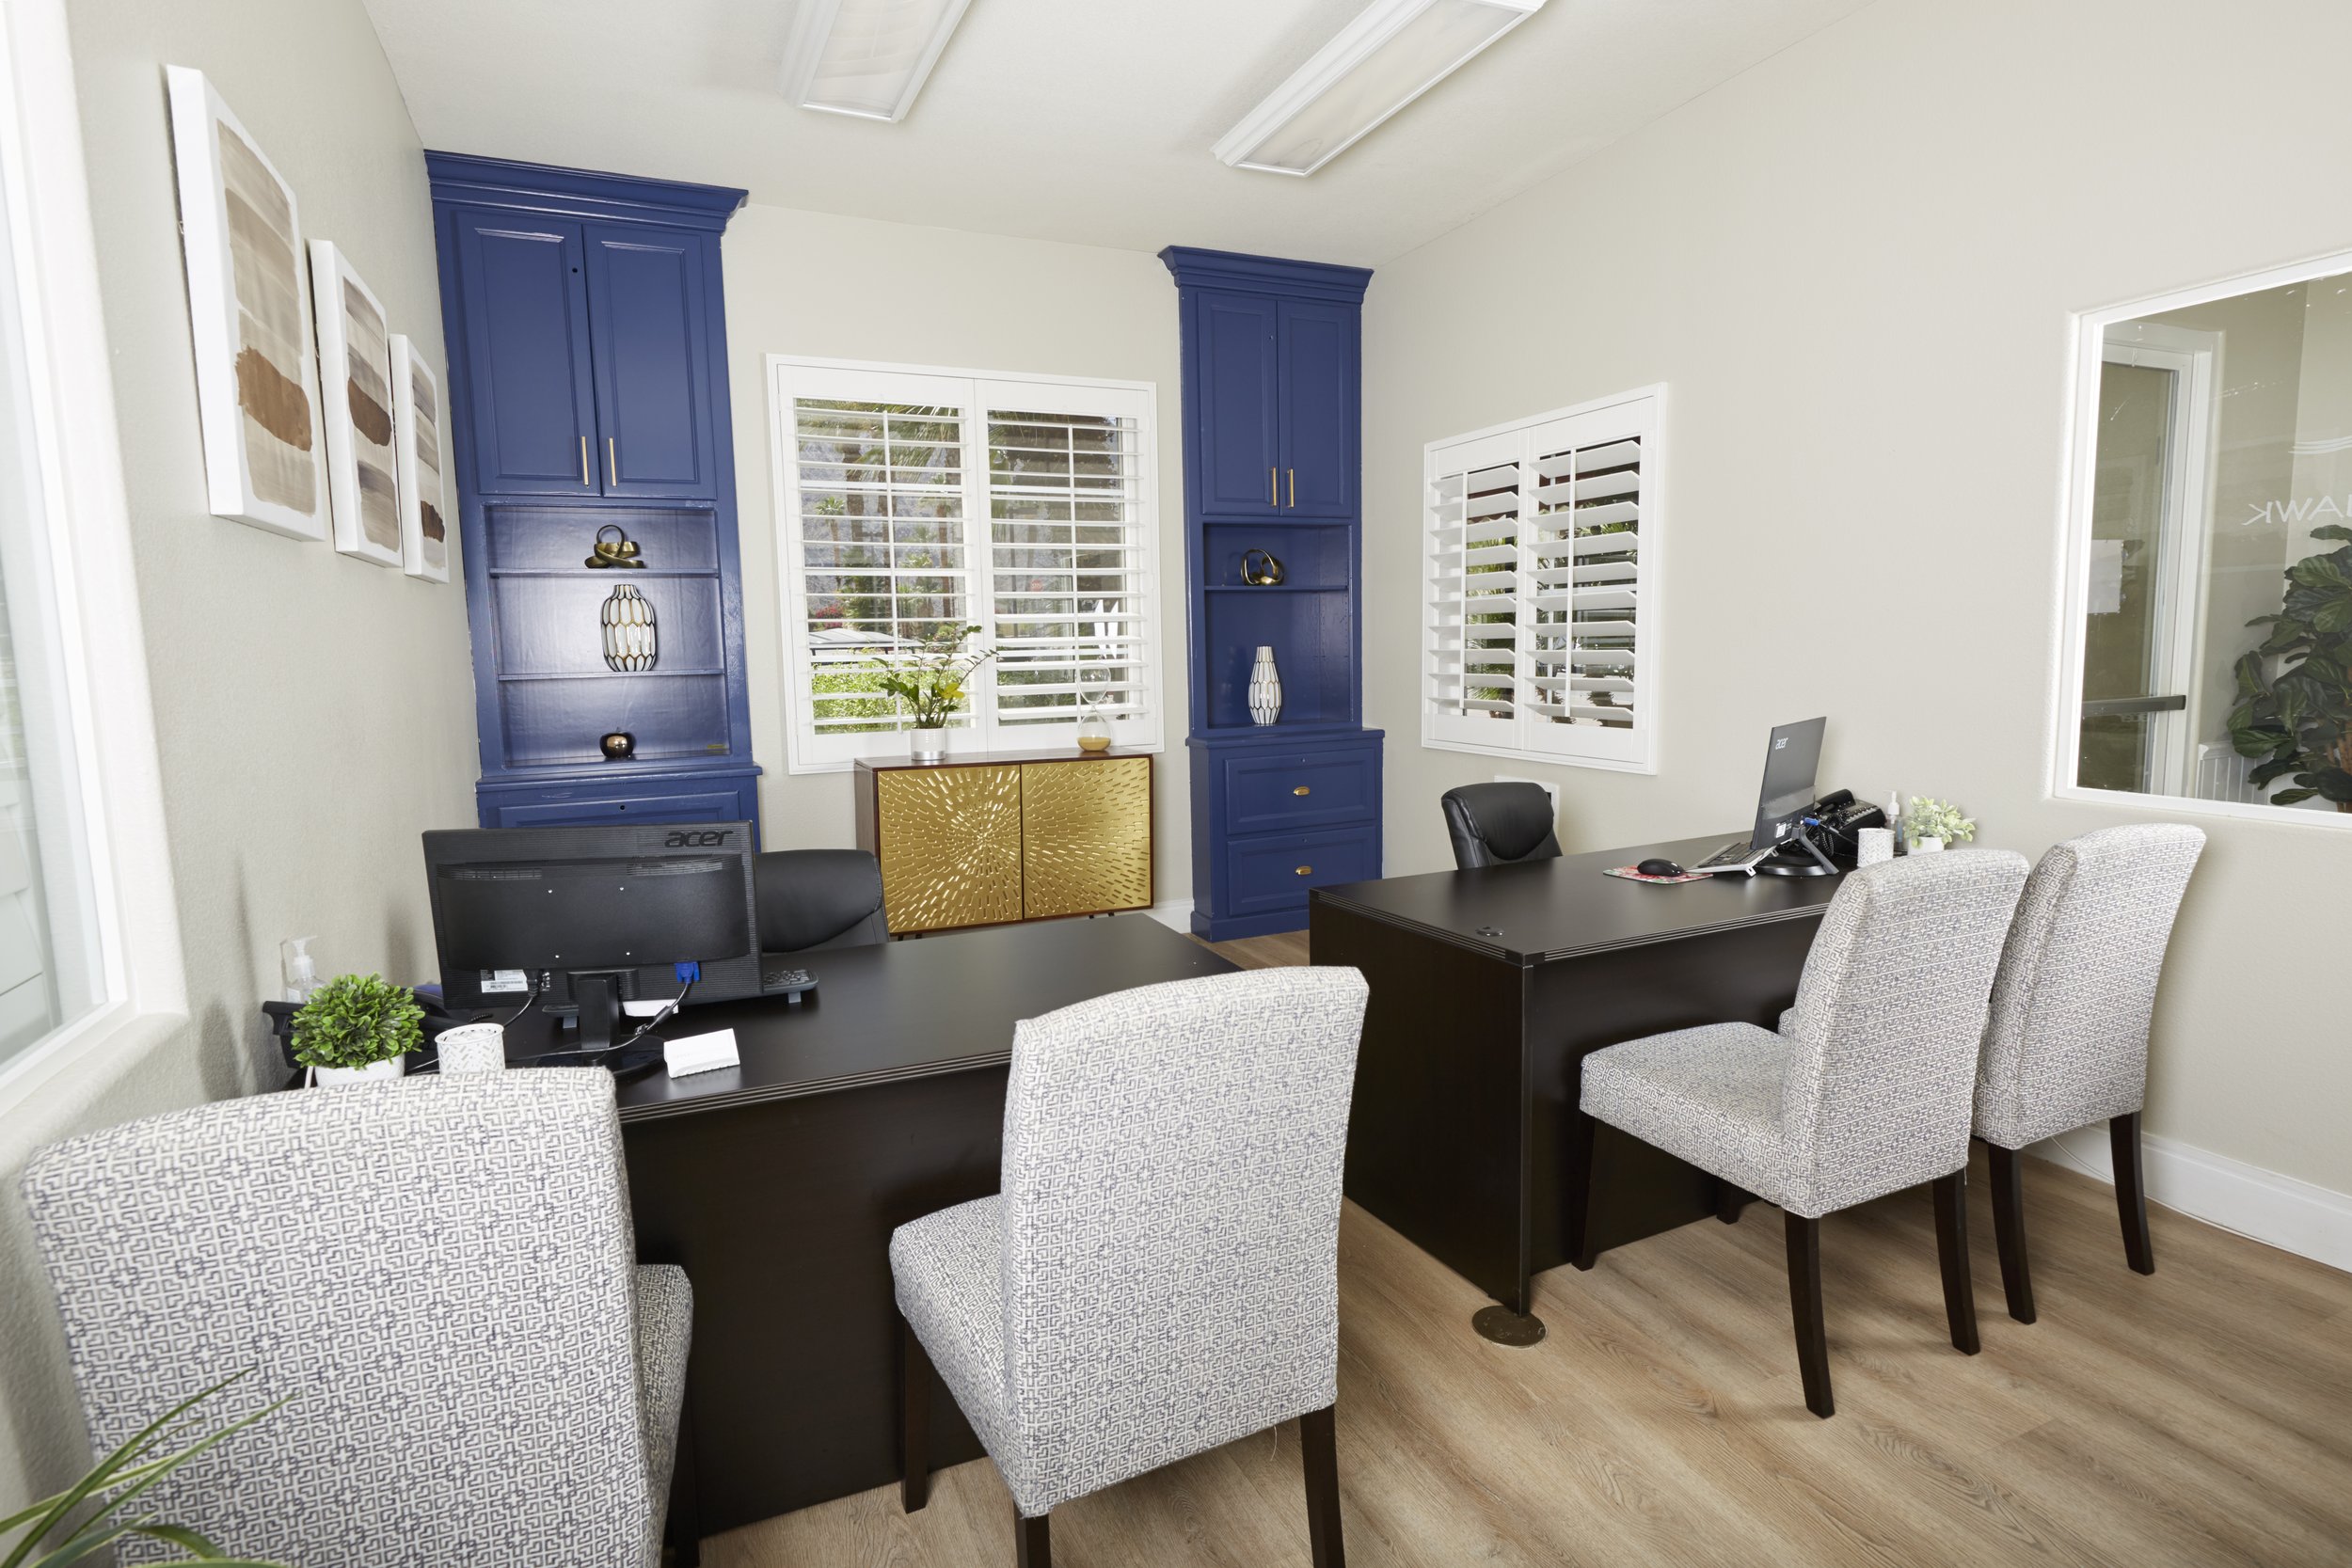  Comfortable and welcoming leasing office at Silverhawk Apartment Homes  